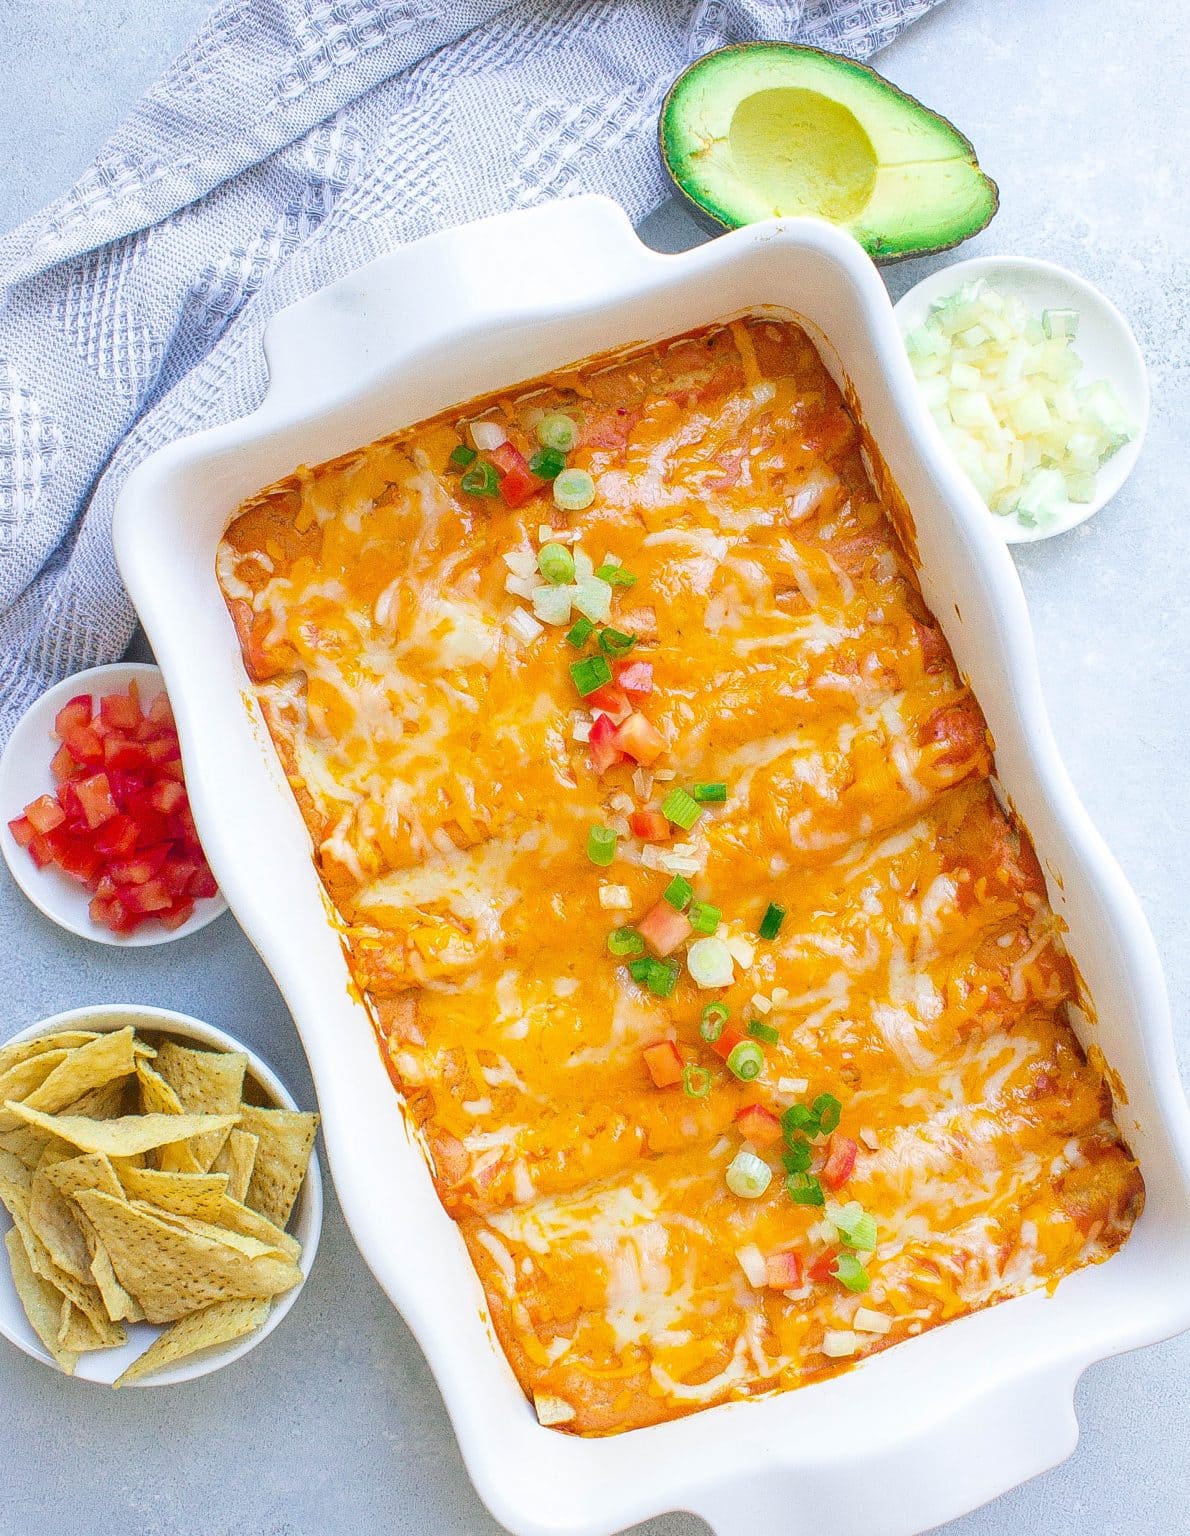 THE BEST Cheese Enchilada Recipe (Easy & Made In 30 Minutes)